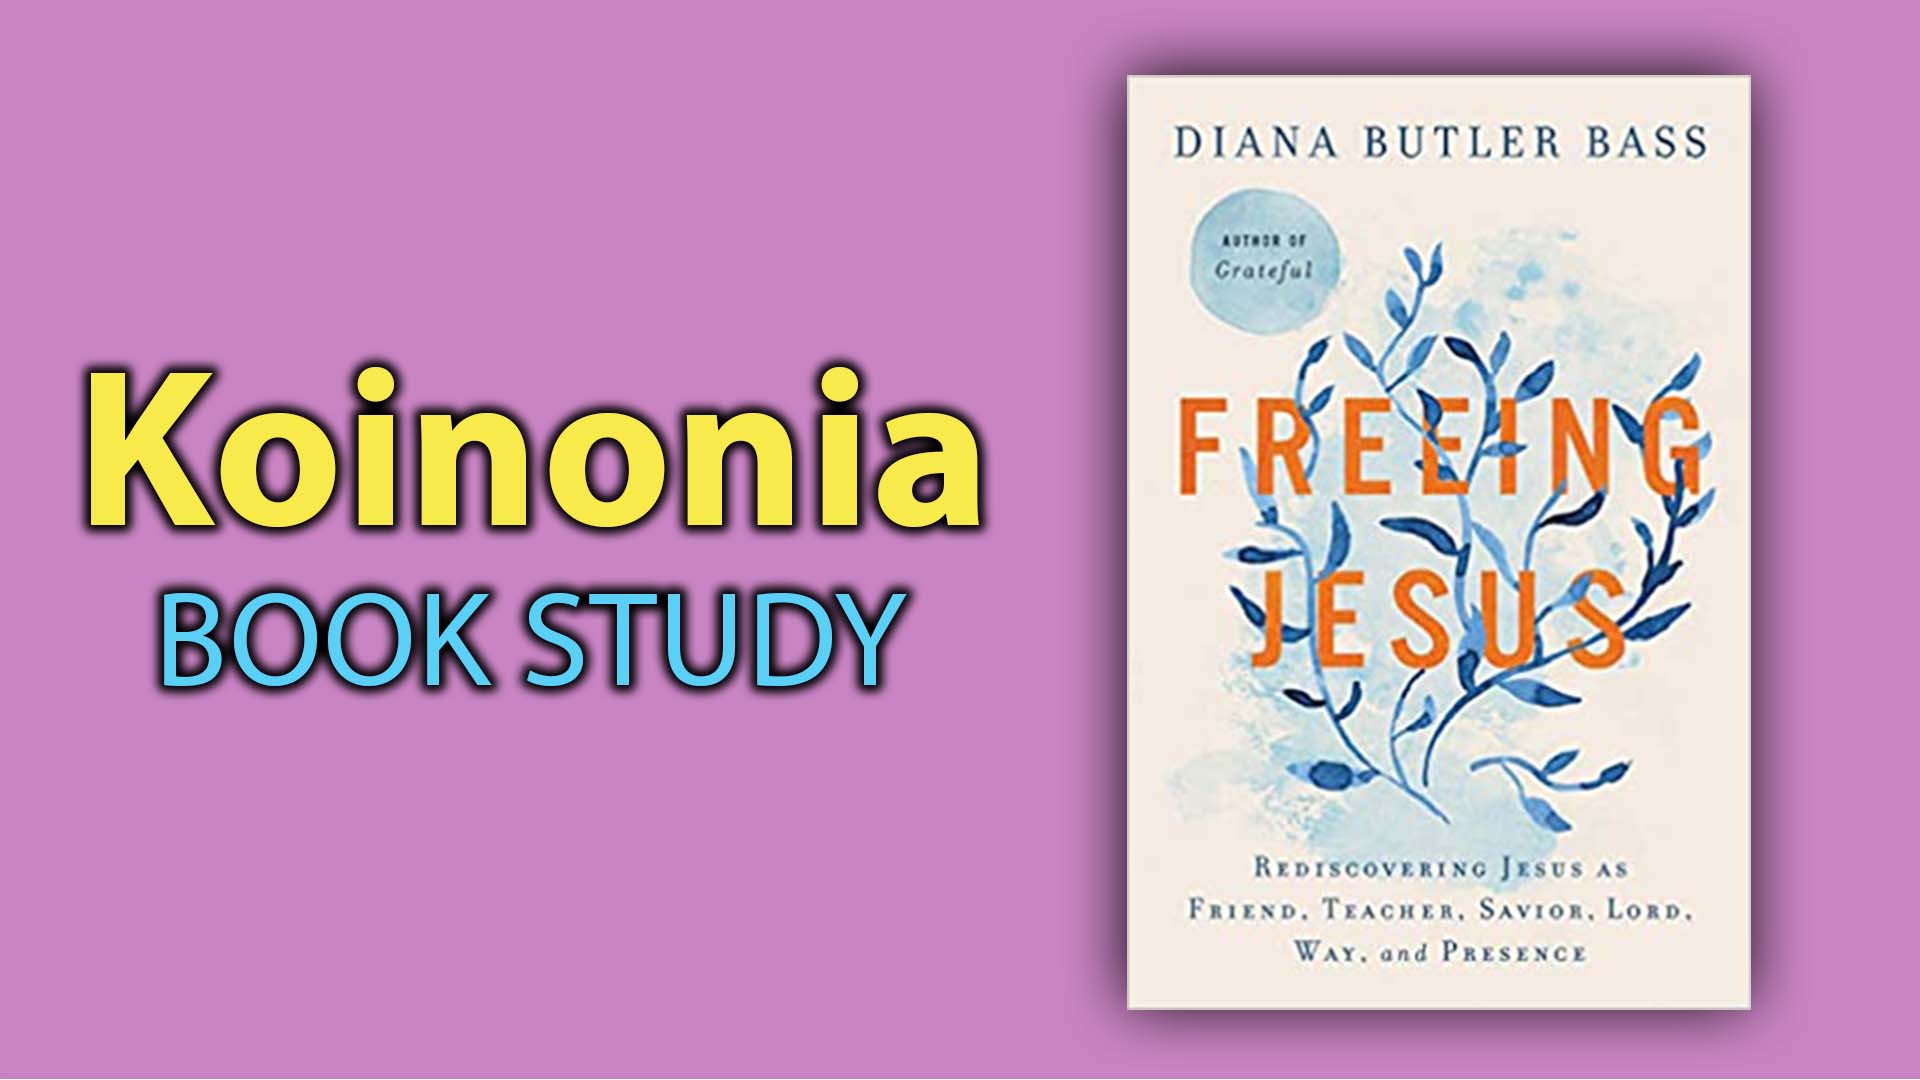 Koinonia 
Sundays, 9:30 a.m., Room 401
Book Study: Freeing Jesus by Diana Butler Bass
